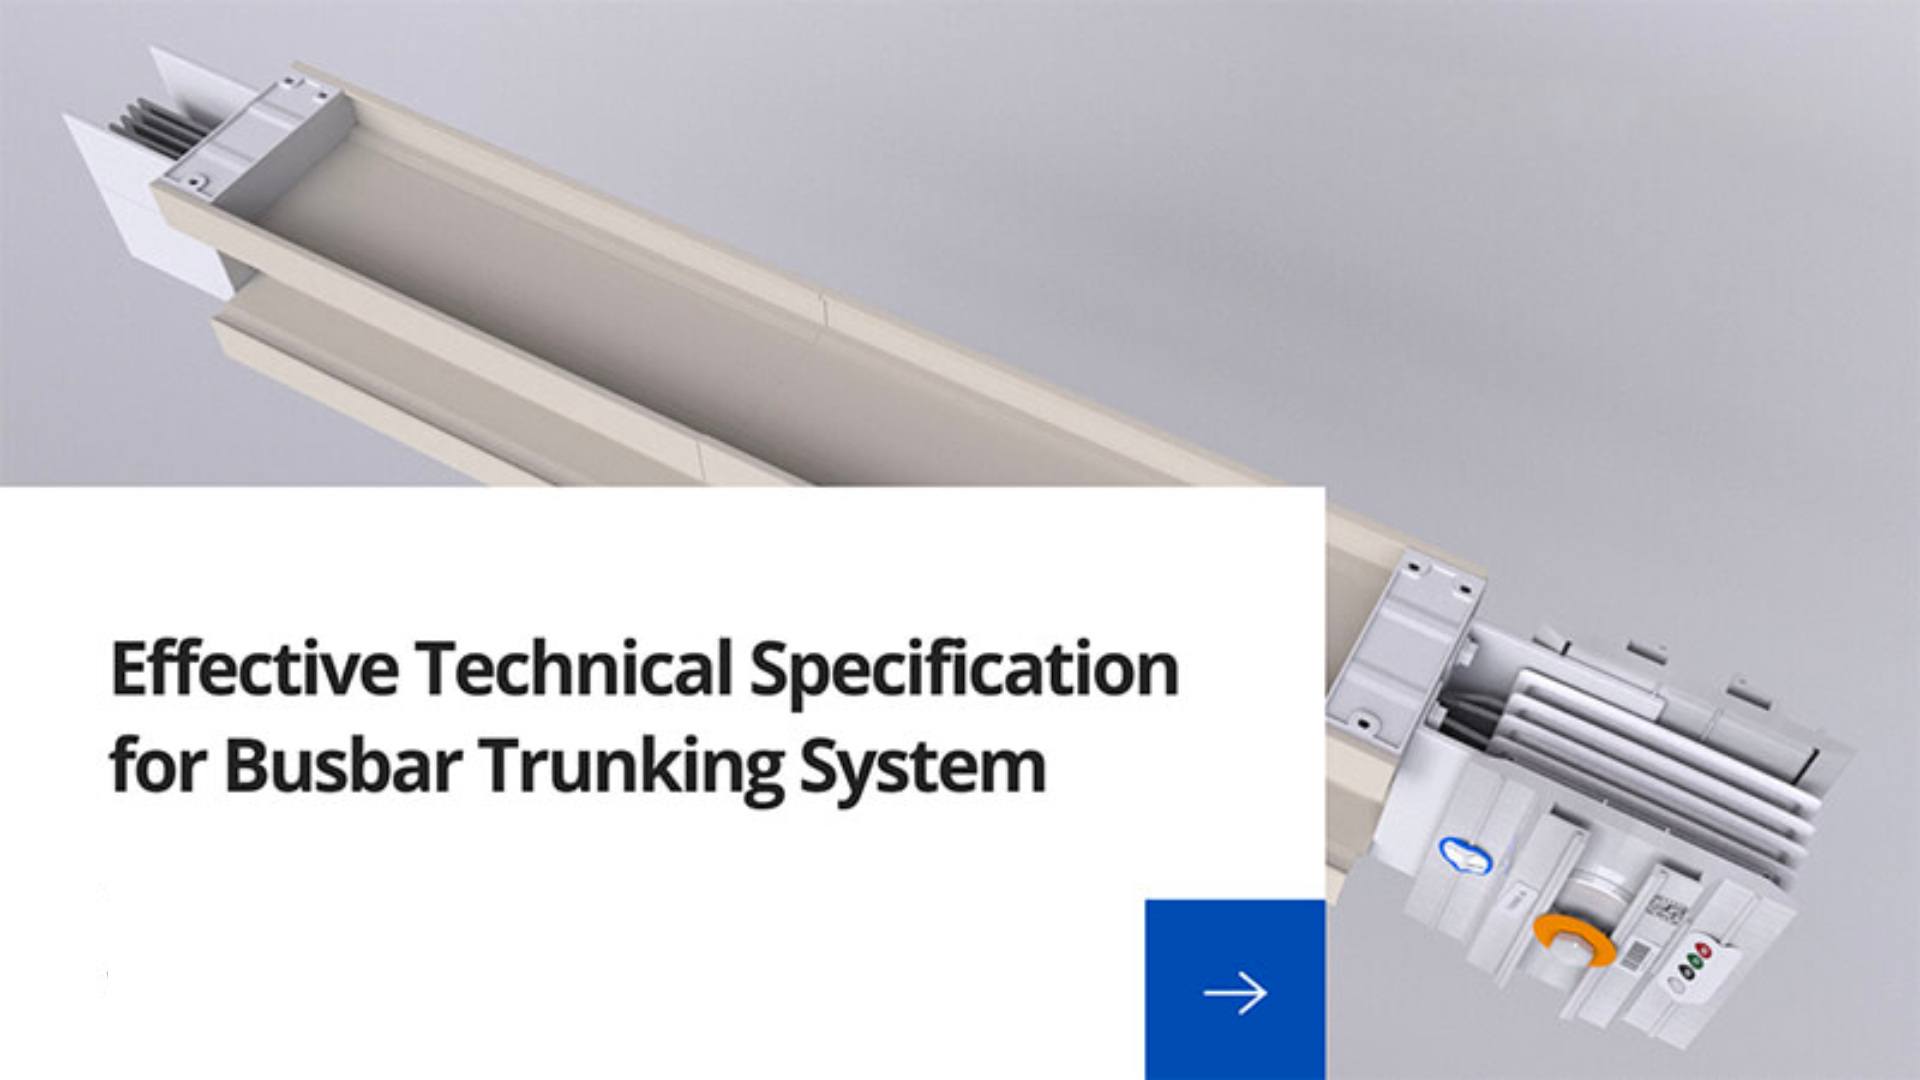 busway-webinar-effective-technival-specification-for-busbar-trunking-system